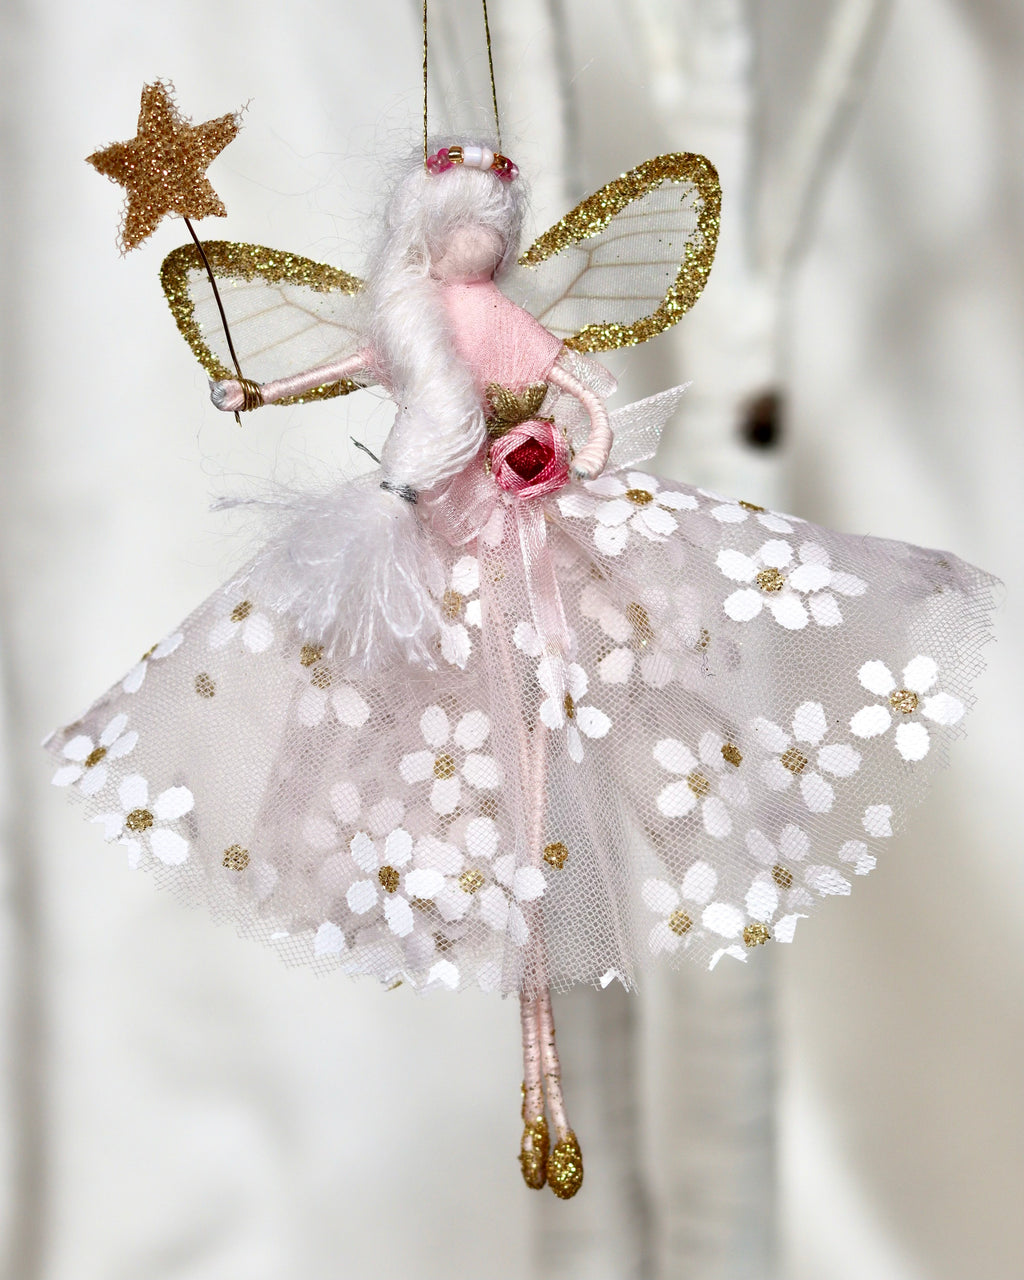 ‘Joy’ Fairy Decoration - Handmade fairy decoration that makes the perfect heirloom gift for Birthdays, Easter and Special Occasions.